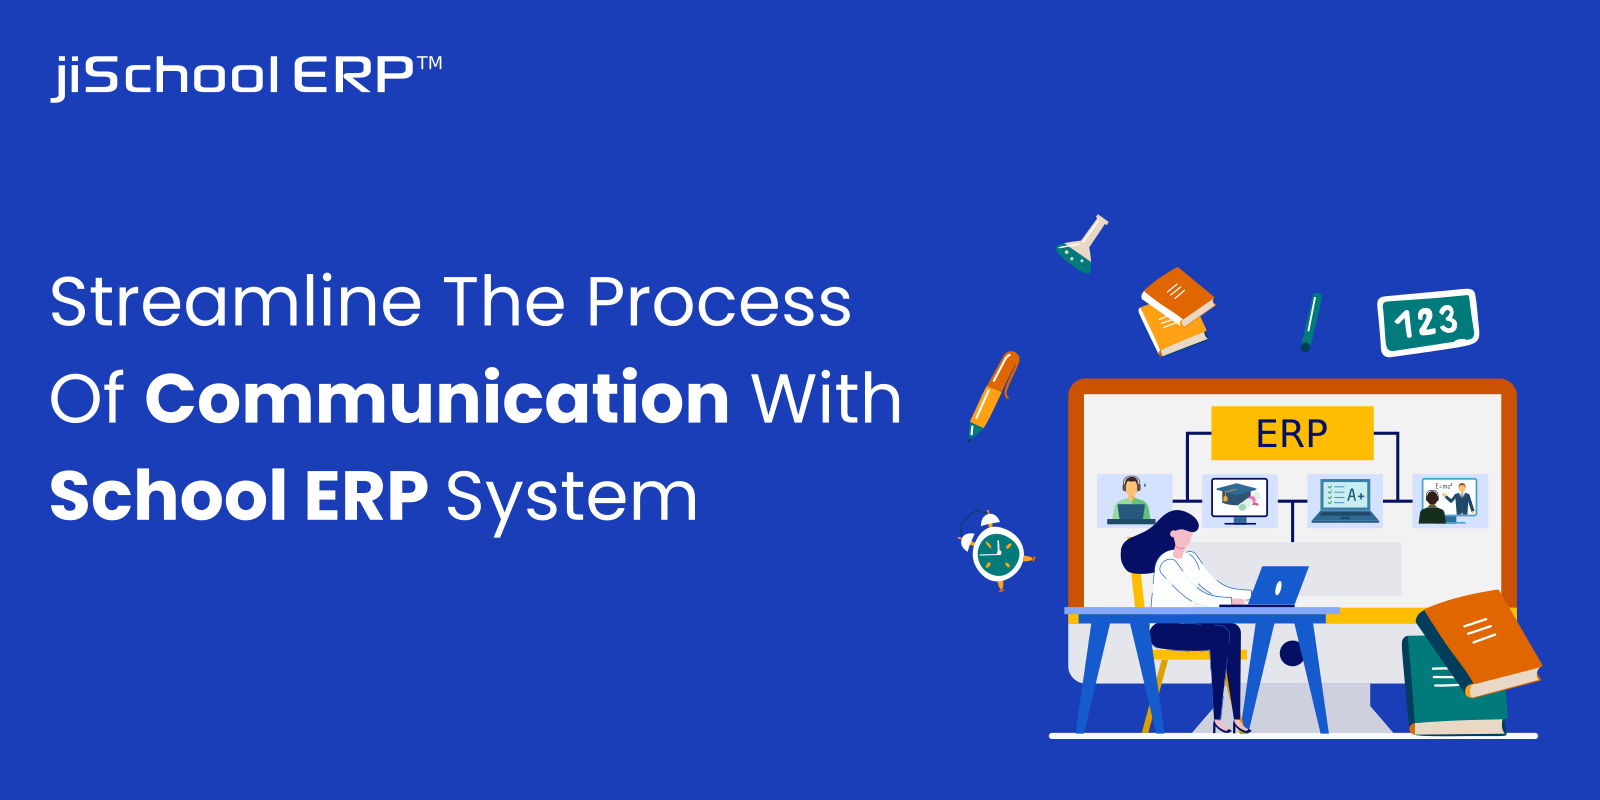 Streamline The Process Of Communication With School ERP System